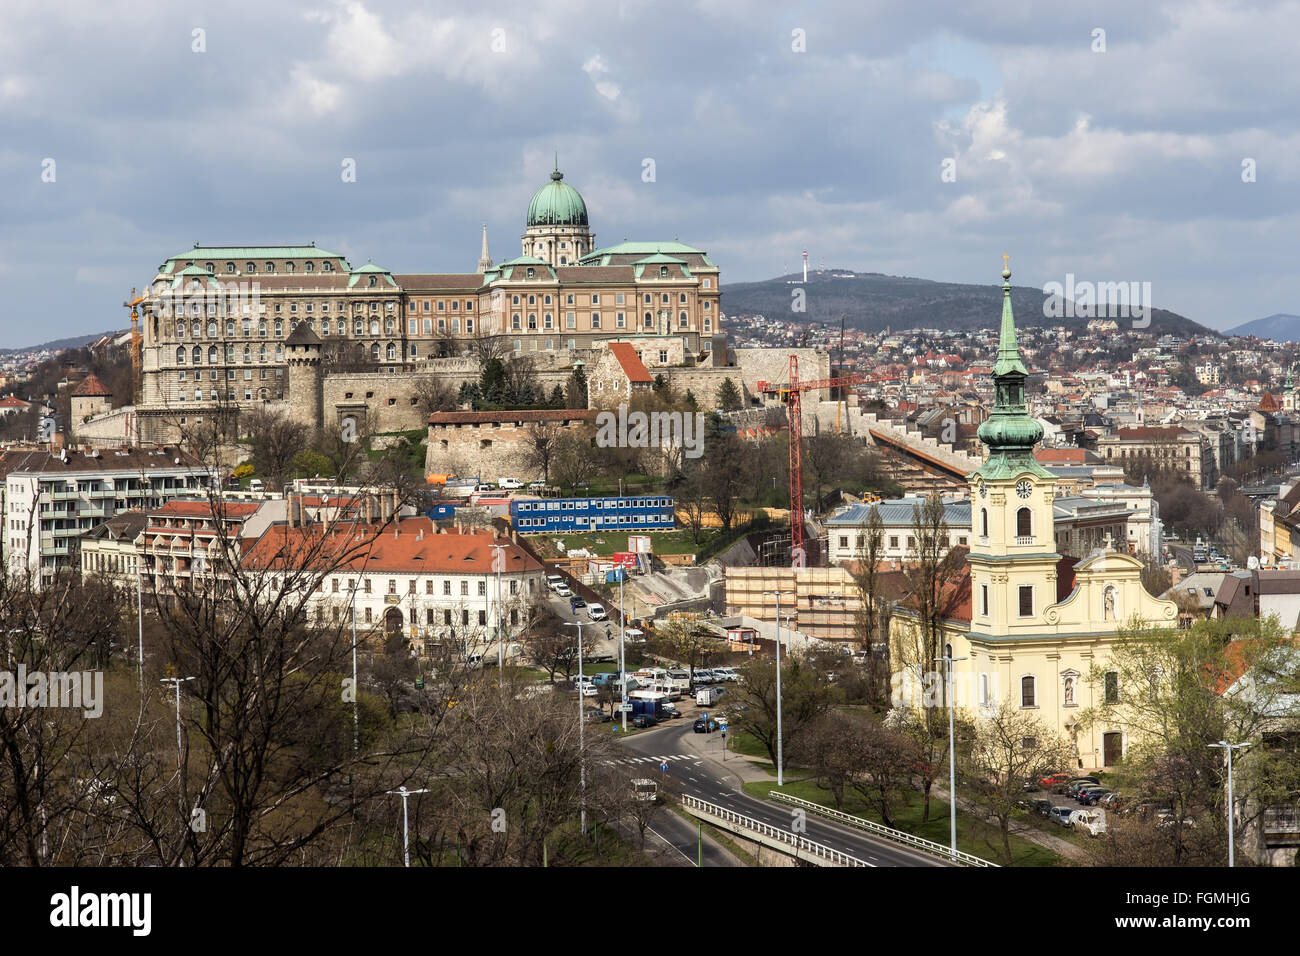 View on Buda castle hill with city around Stock Photo